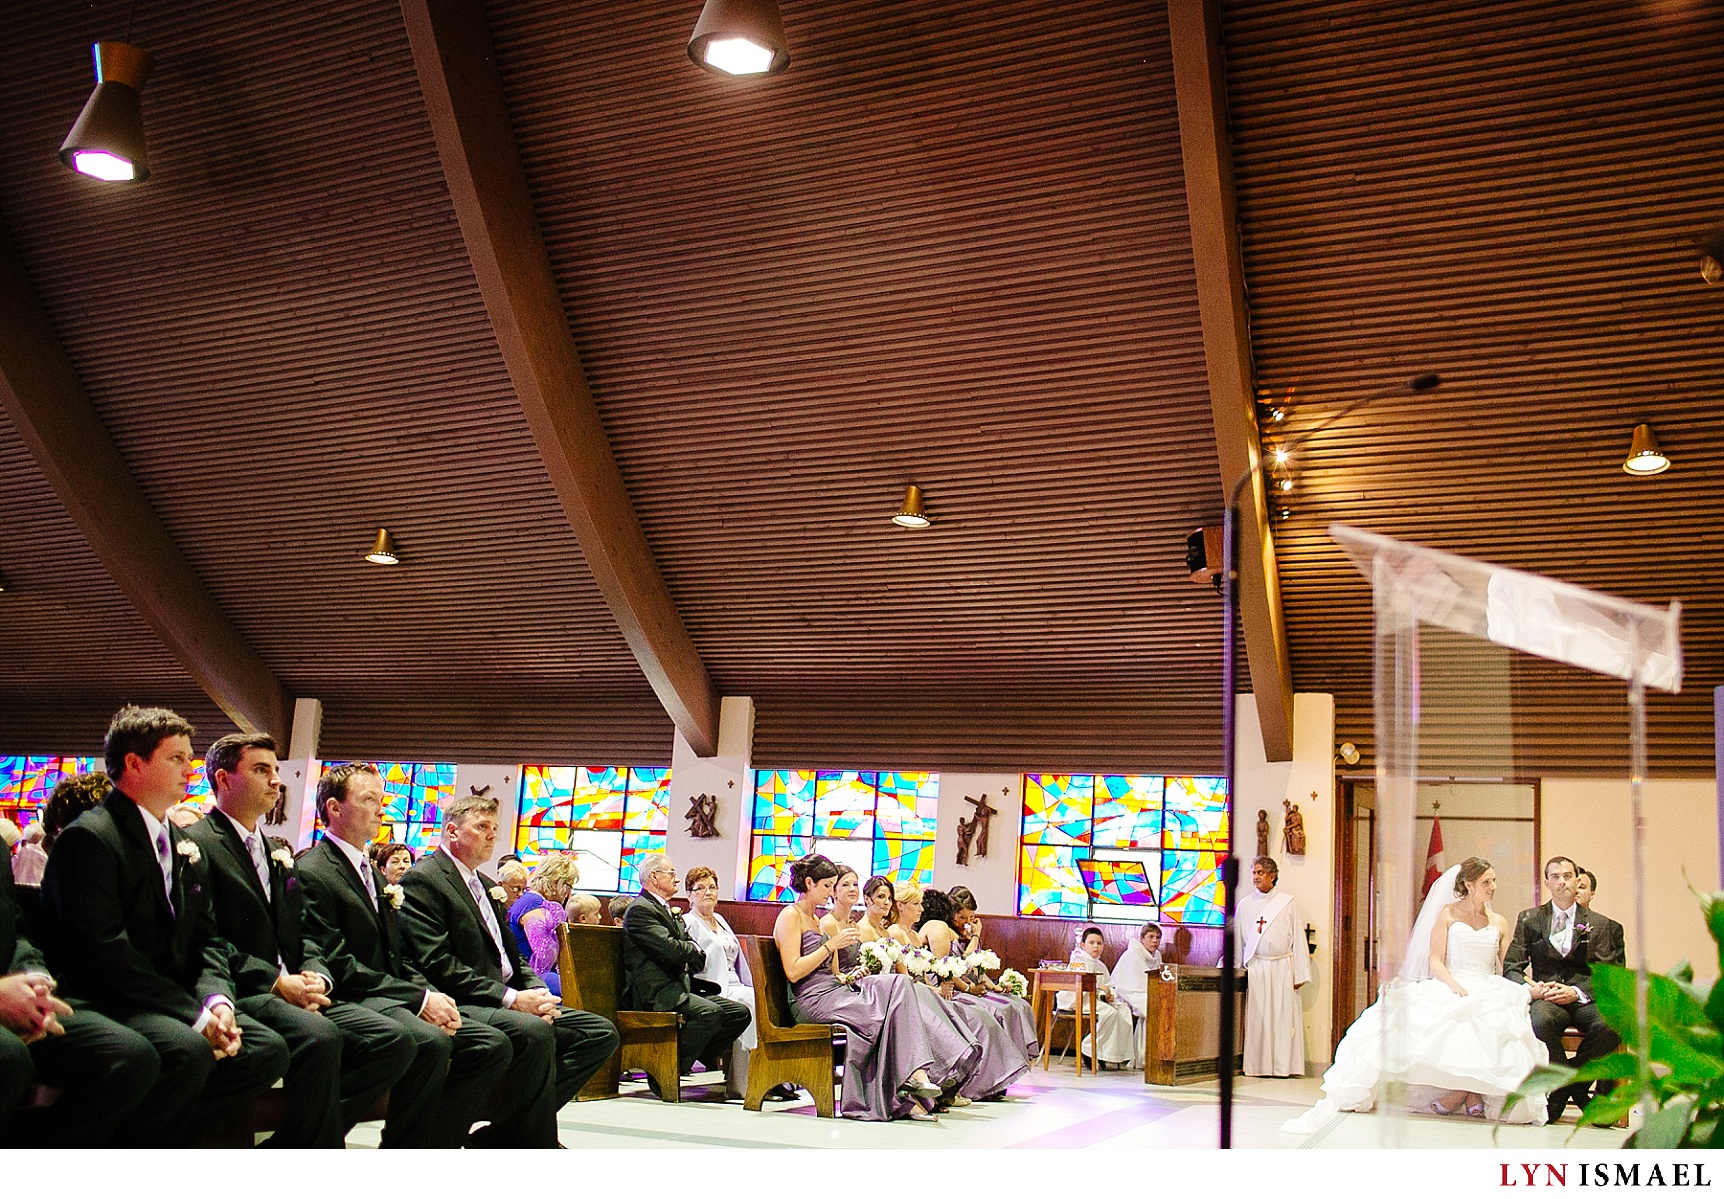 A layered photo of a wedding ceremony inside St Mike's Catholic Church in Waterloo